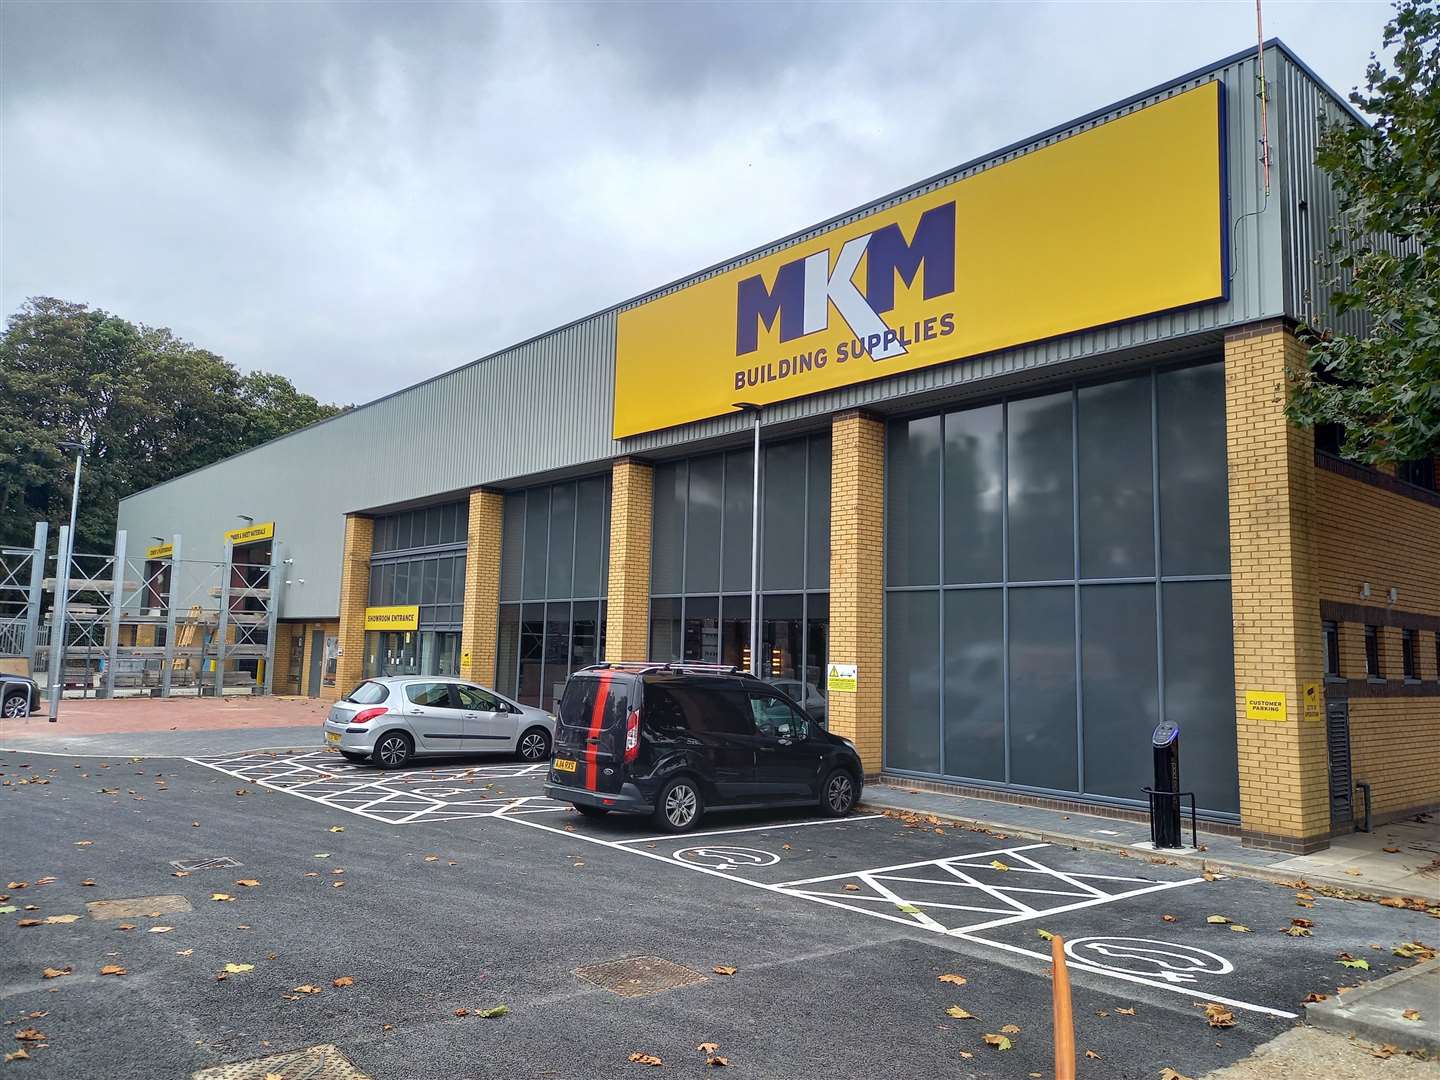 MKM Supplies has taken over the former Homebase site in Wincheap